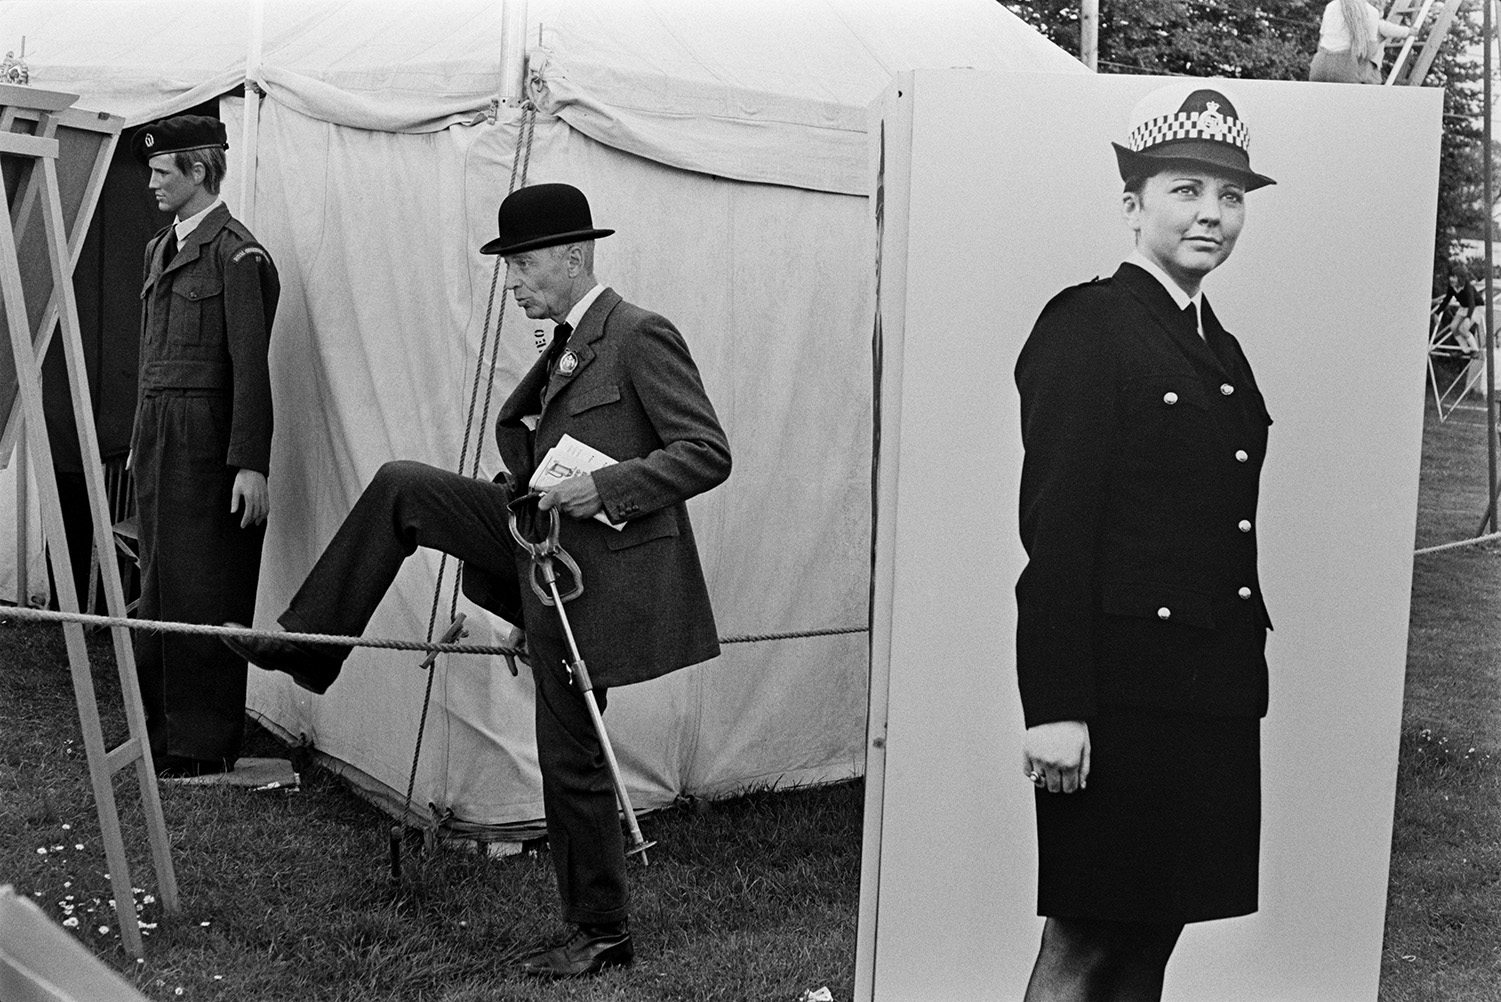 A man wearing a bowler hat climbing over a rope barrier by a show tent at the Devon County Show in Whipton, Exeter. A mannequin wearing a military uniform is in the background and a large photograph of a policewoman is on a display board in the foreground.